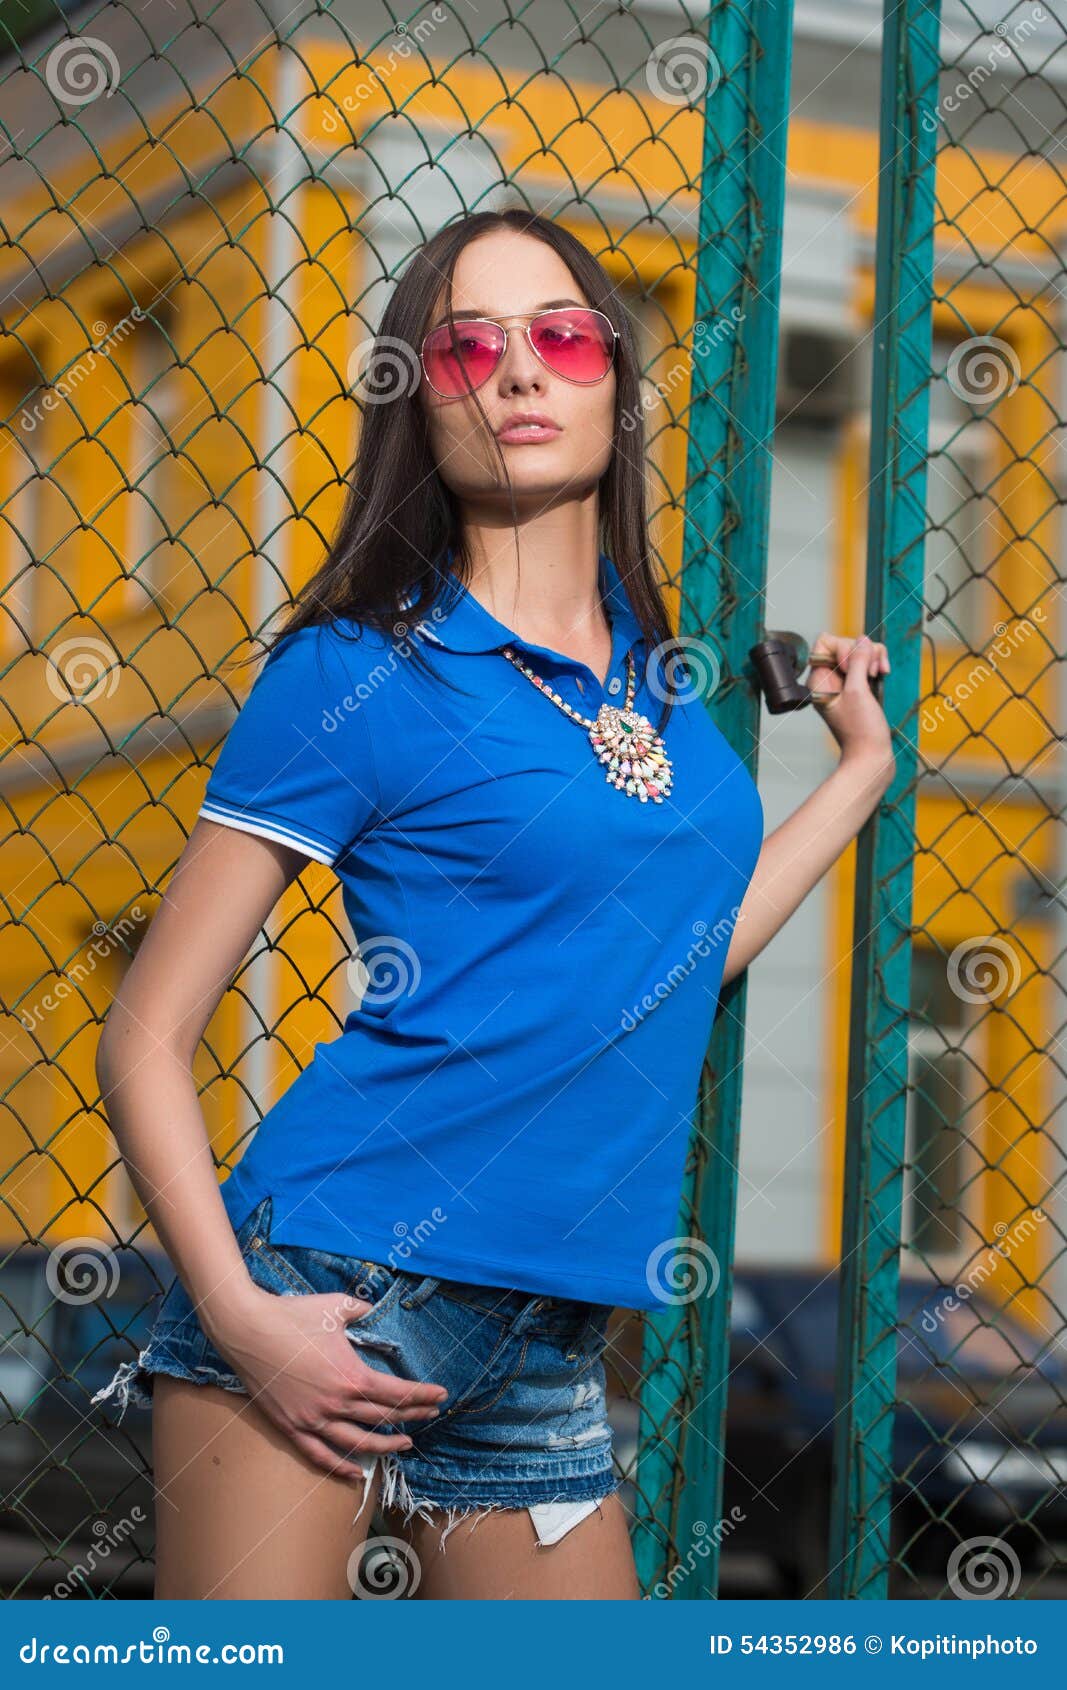 Young Woman Posing Outdoor Over Fence Mesh Stock Photo Image Of